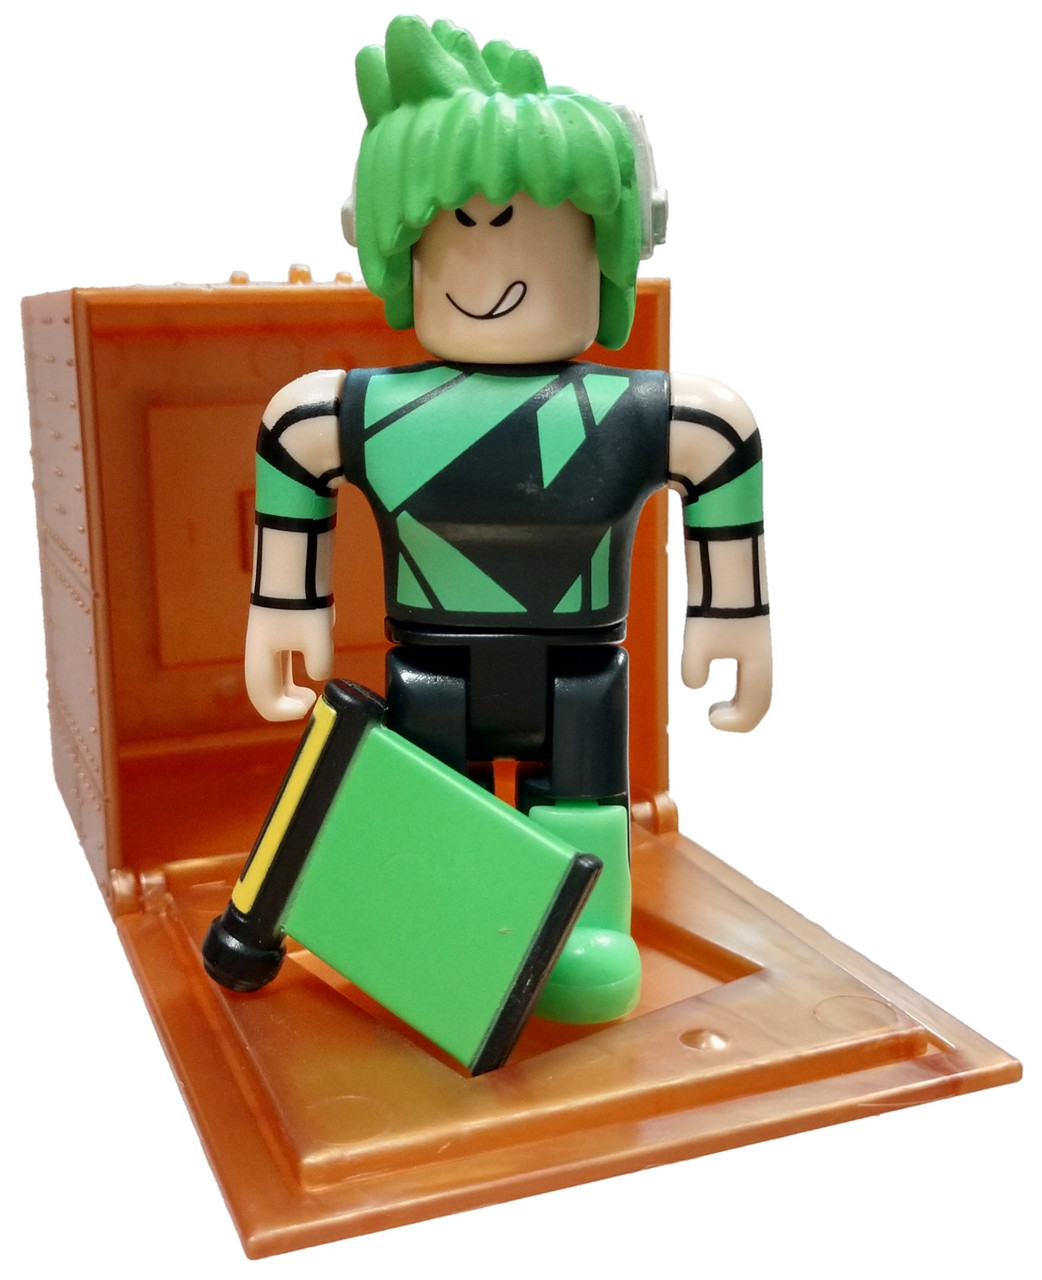 Roblox Series 8 Texting Simulator Future Tech Boy 3 Mini Figure With Cube And Online Code Loose Jazwares Toywiz - snake simulator roblox codes